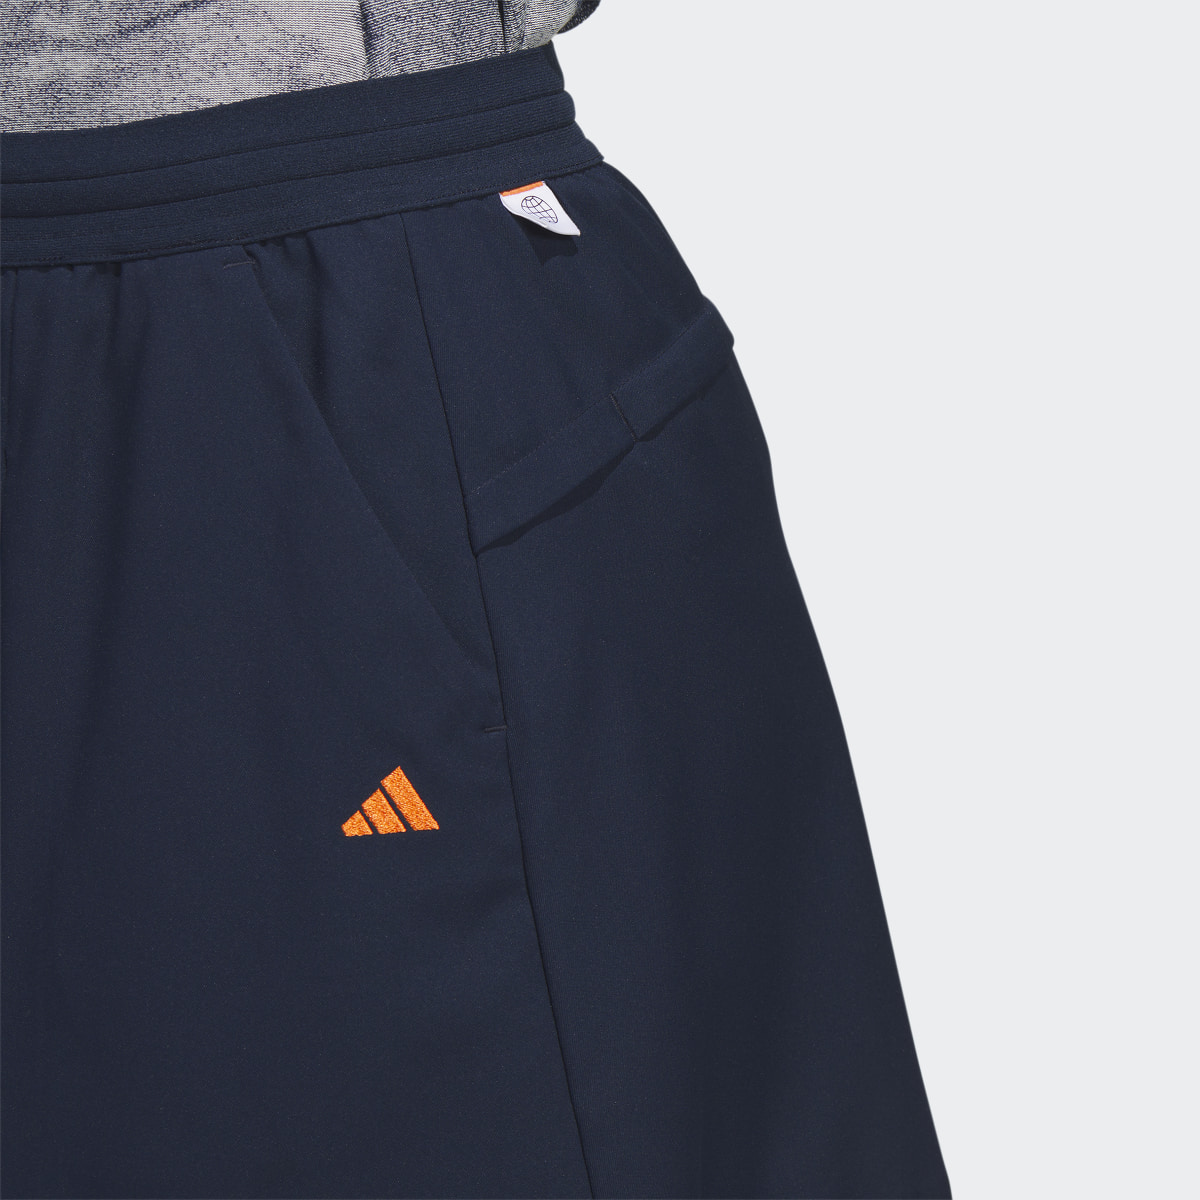 Adidas Made To Be Remade Flare Golf Skirt. 6